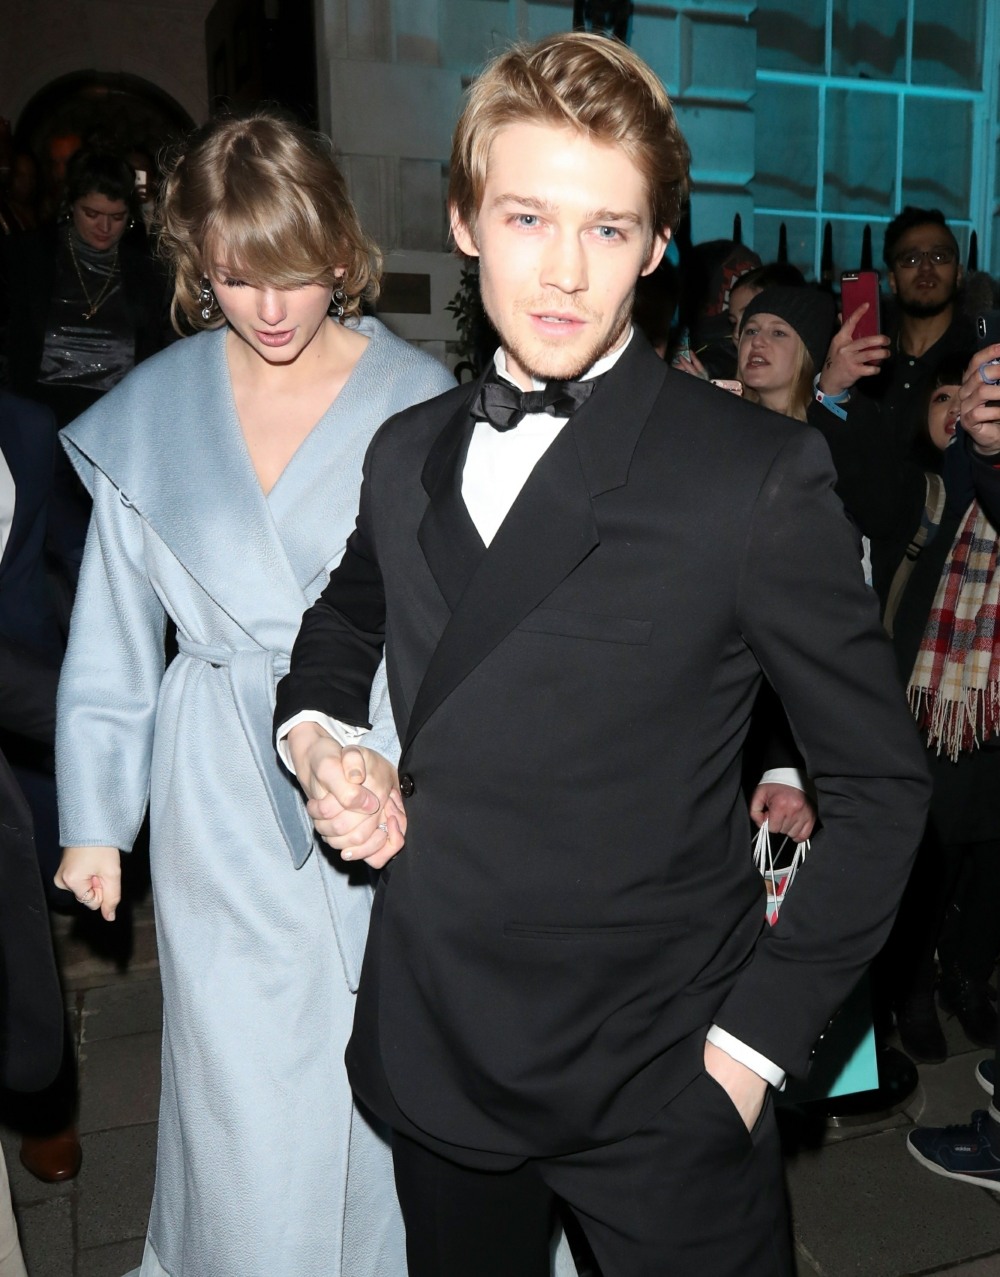 Cute couple Taylor Swift and Joe Alwyn leaving the BAFTA party at Annabel's